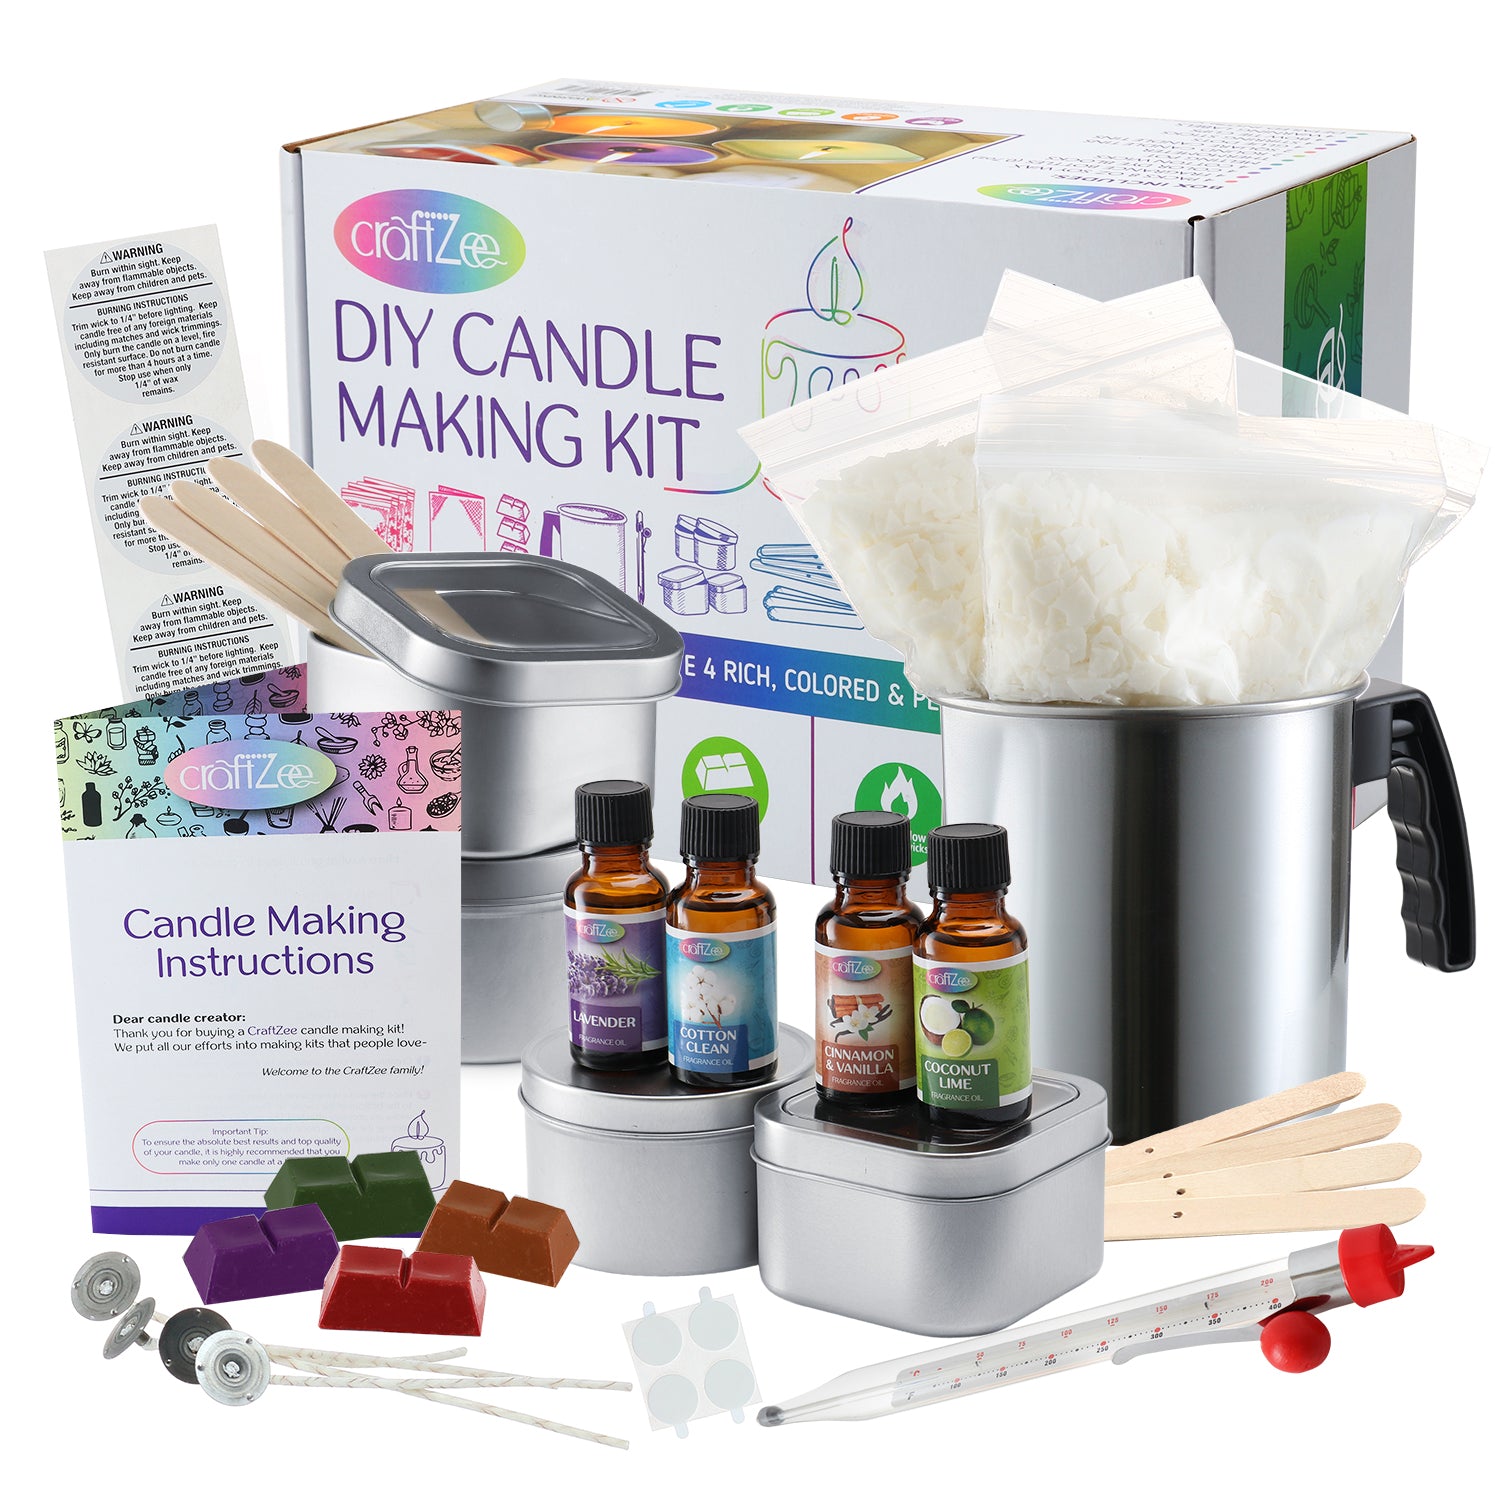 CraftZee Soap Making Kit - DIY Kits for Adults and Kids - Soap Making Supplies Includes Glycerin Soap Base, Fragrance Oils, Silicone Molds & More Melt